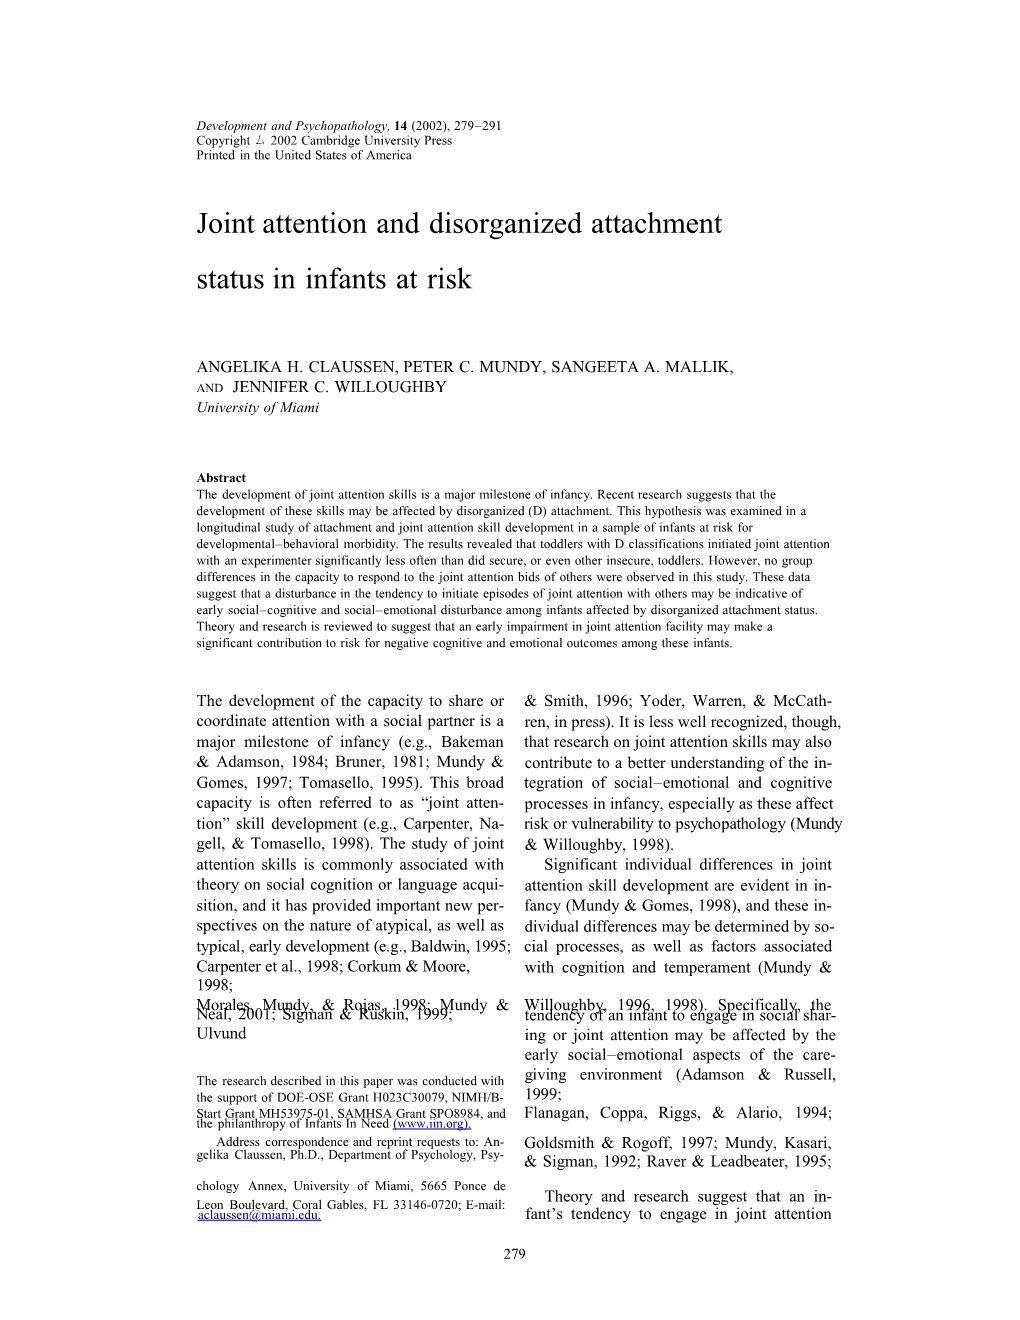 Joint Attention and Disorganized Attachment Status in Infants at Risk